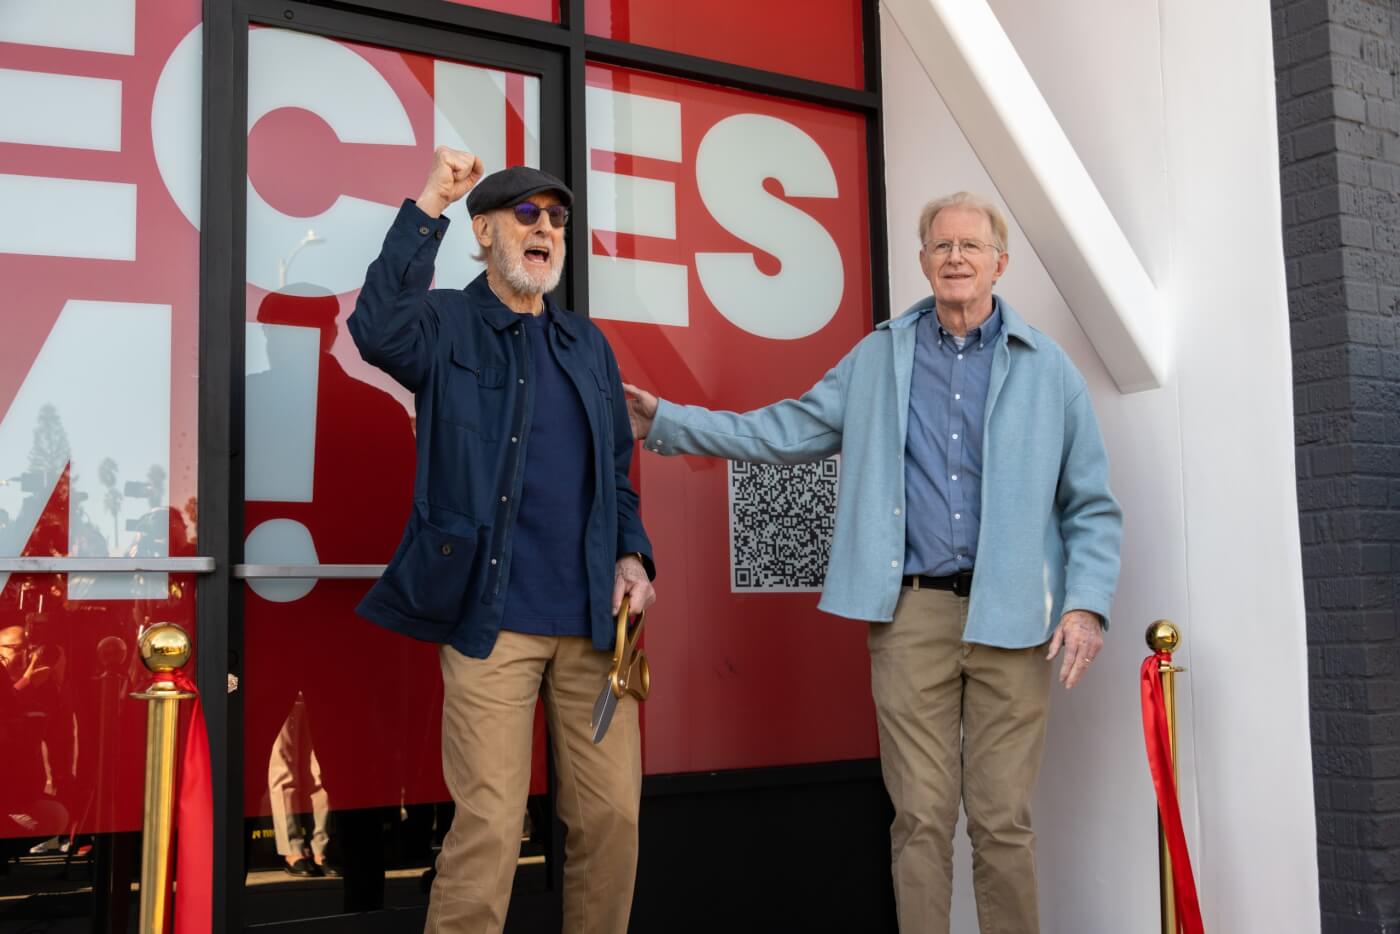 Phot showing James Cromwell cheering after ribbon is cut